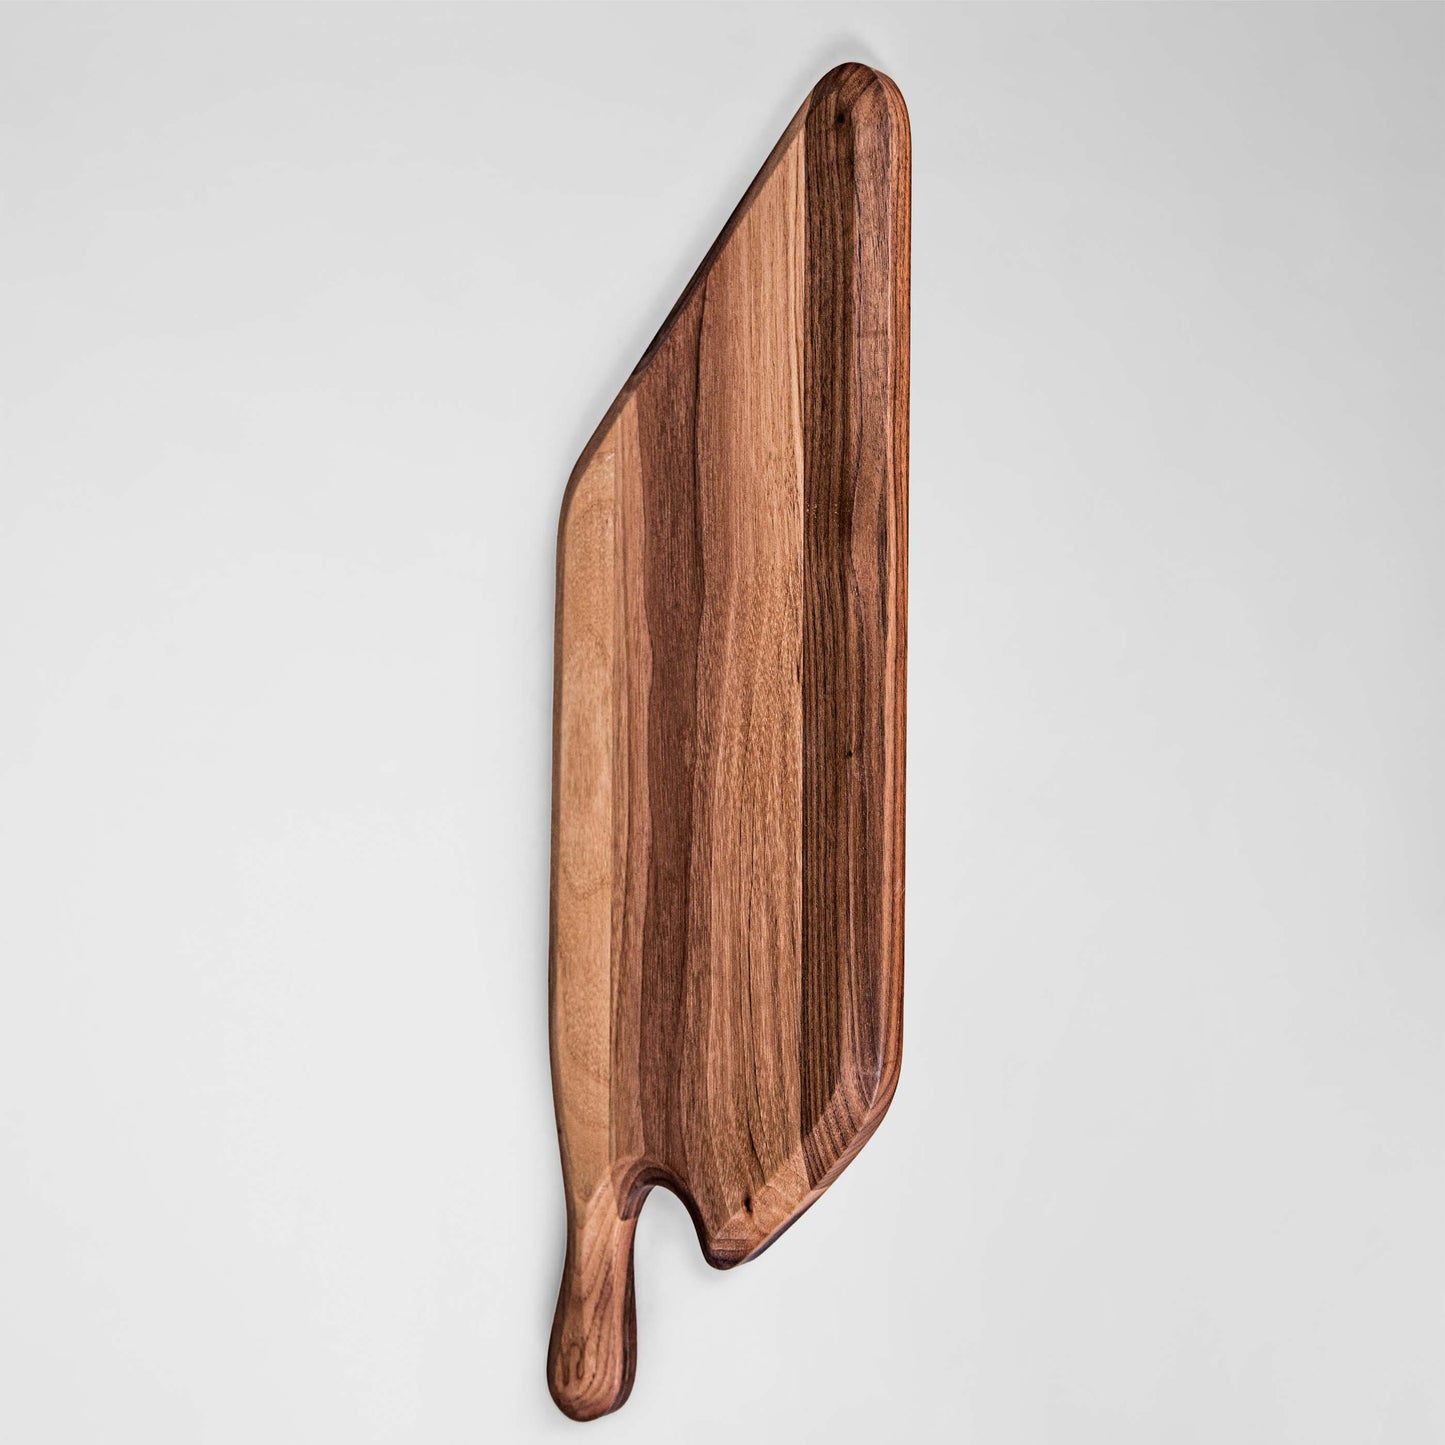 Taapa - Serving board made of walnut or ash